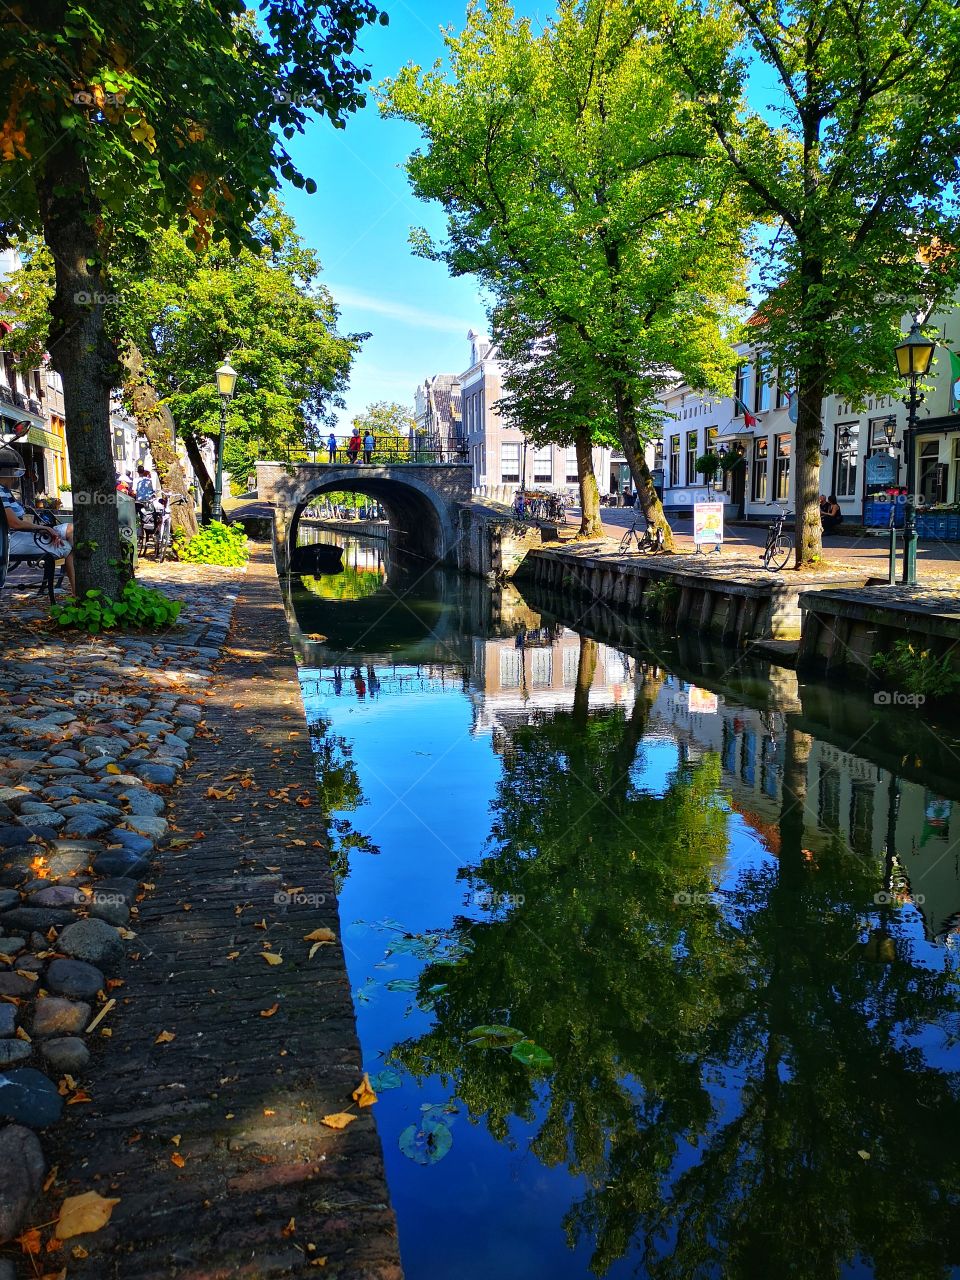 Awesome reflection of trees ina canal in Netherlands